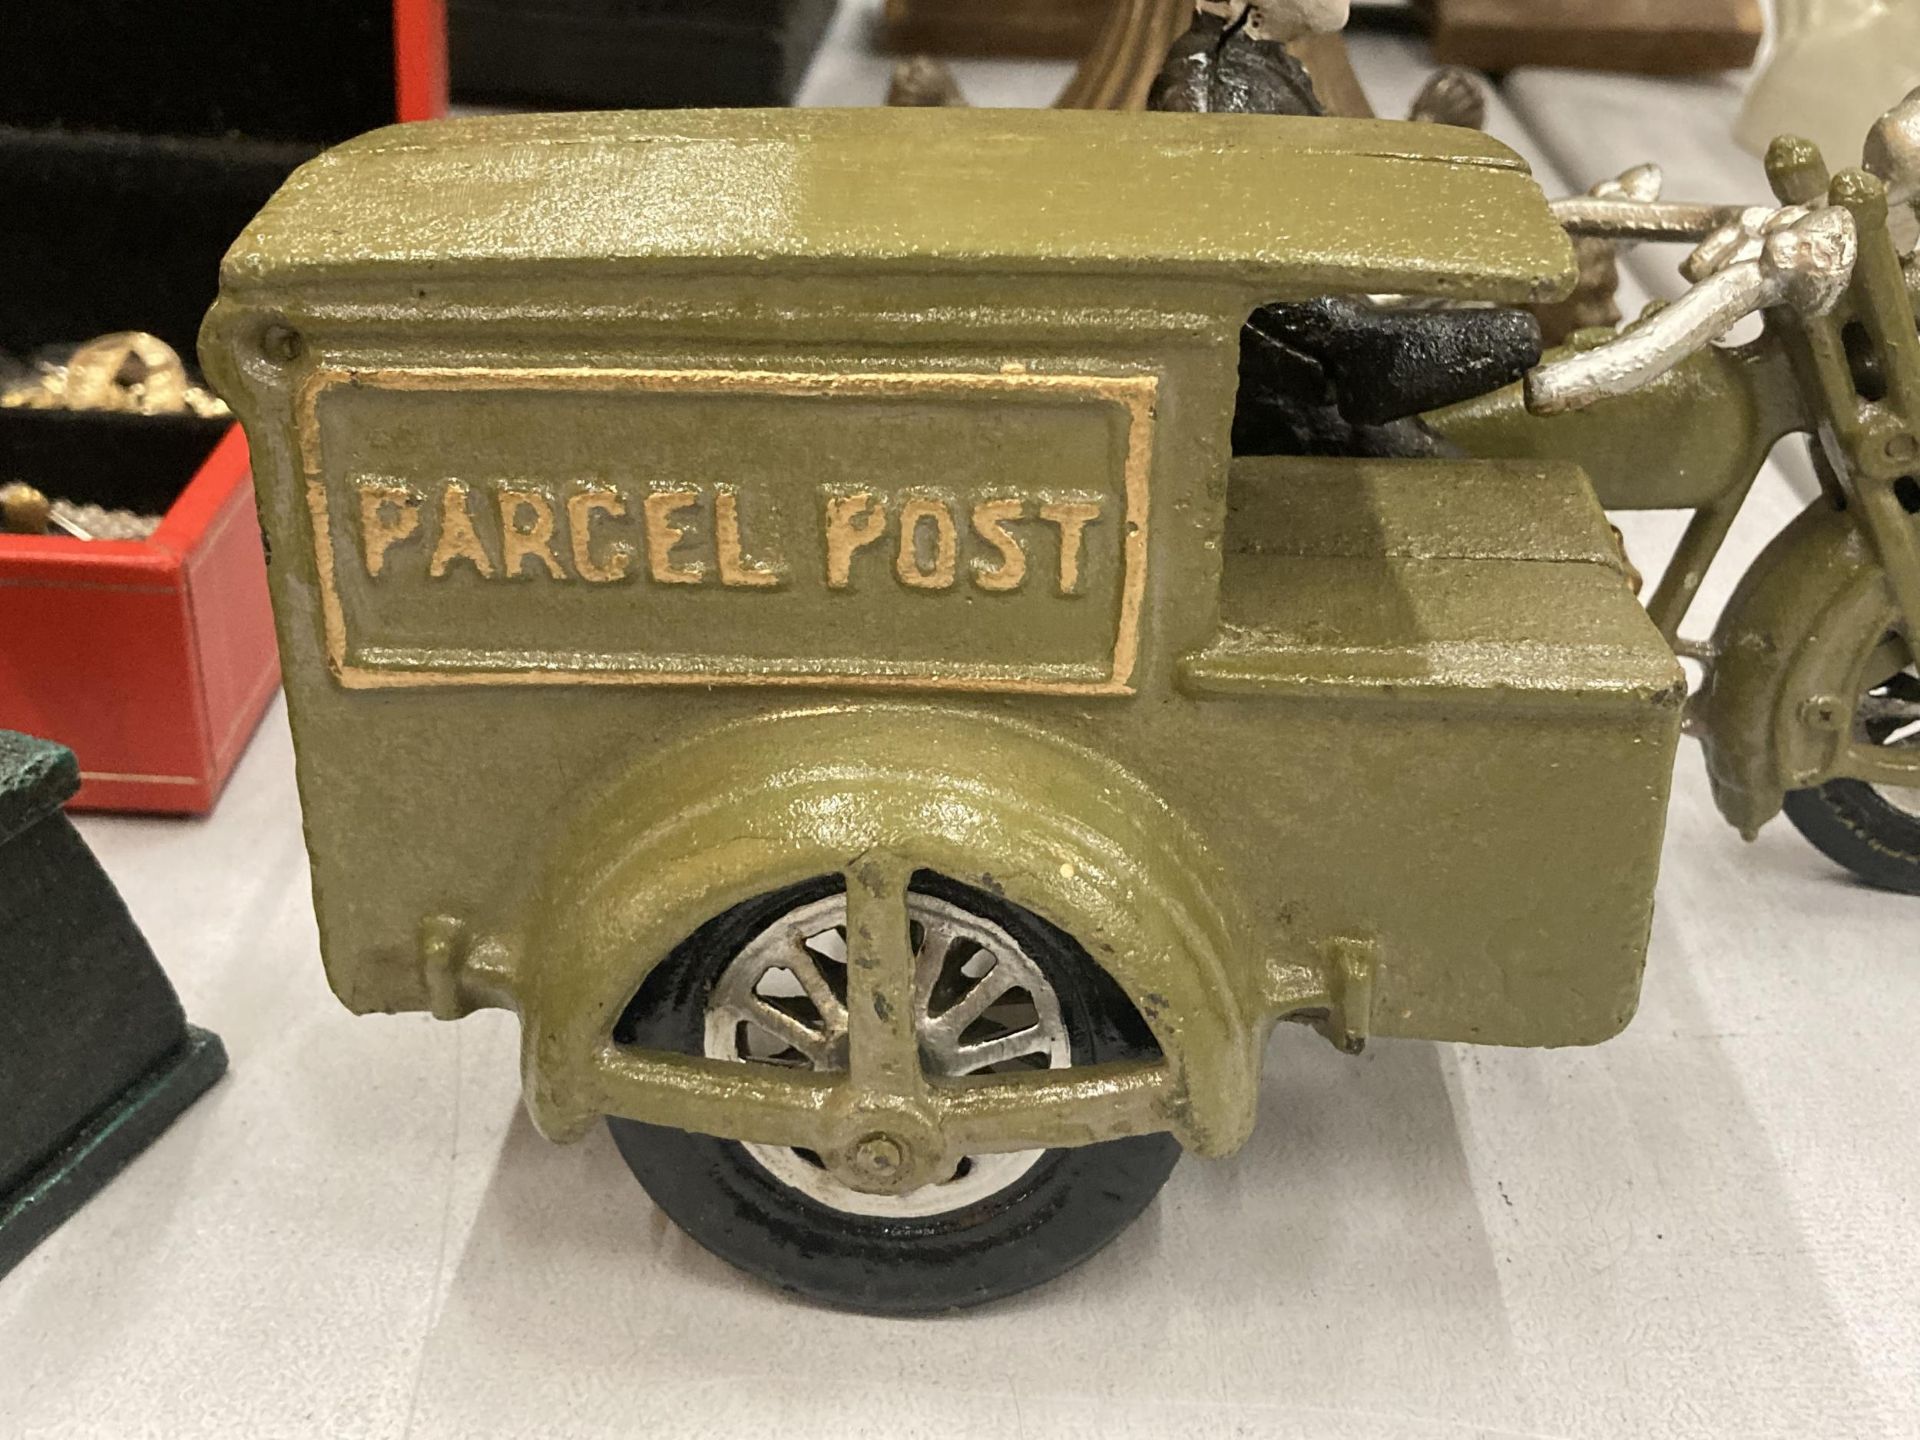 AN UNUSUAL HEAVY CAST MOTOR BIKE, POSTMAN AND PARCEL POST SIDE CAR - Image 3 of 4